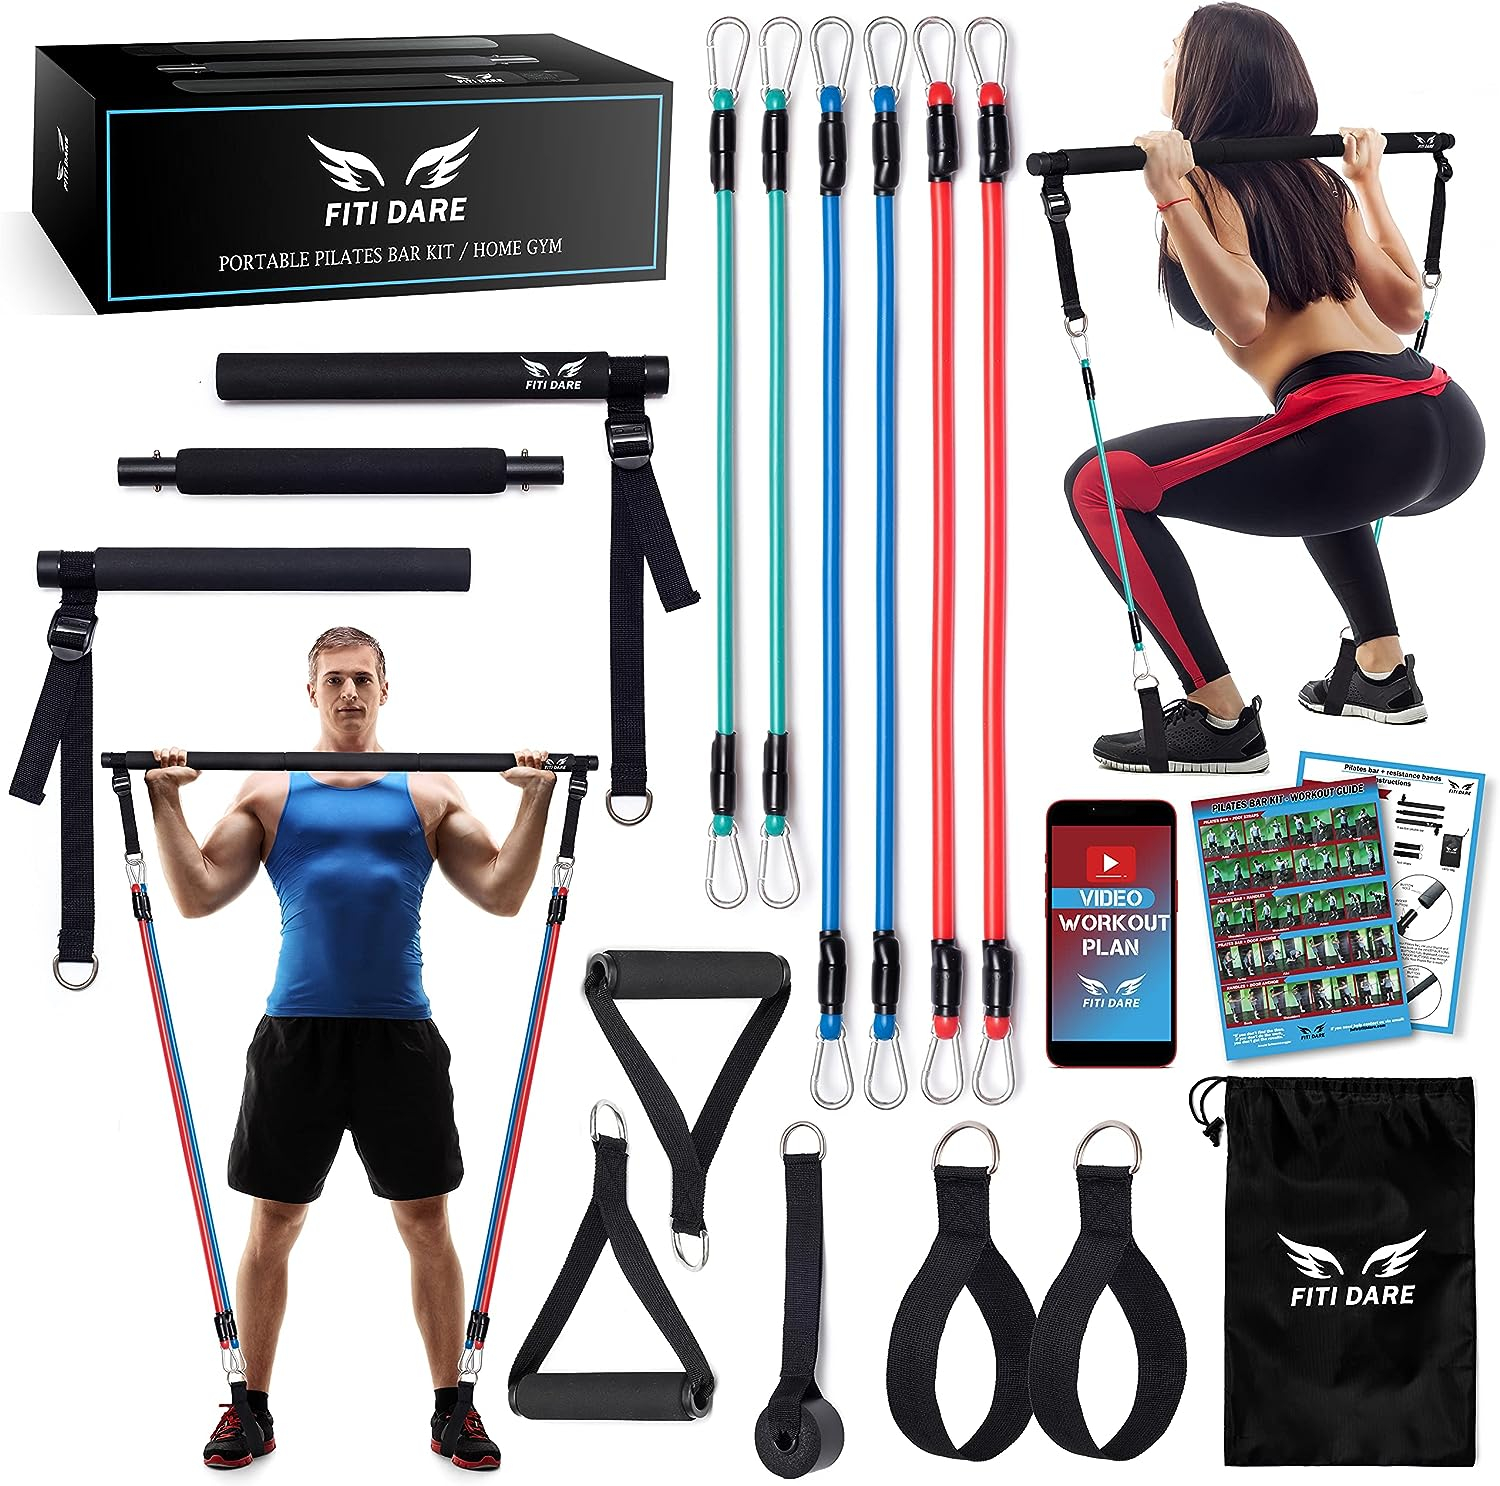 FITI DARE Portable Pilates Bar Kit with Adjustable Resistance Band (25,30,35lb) | Home Workout Equipment for WomenMen of All Heights | Fitness Bands Set | Outdoor Full Body Exercise Gym with Video